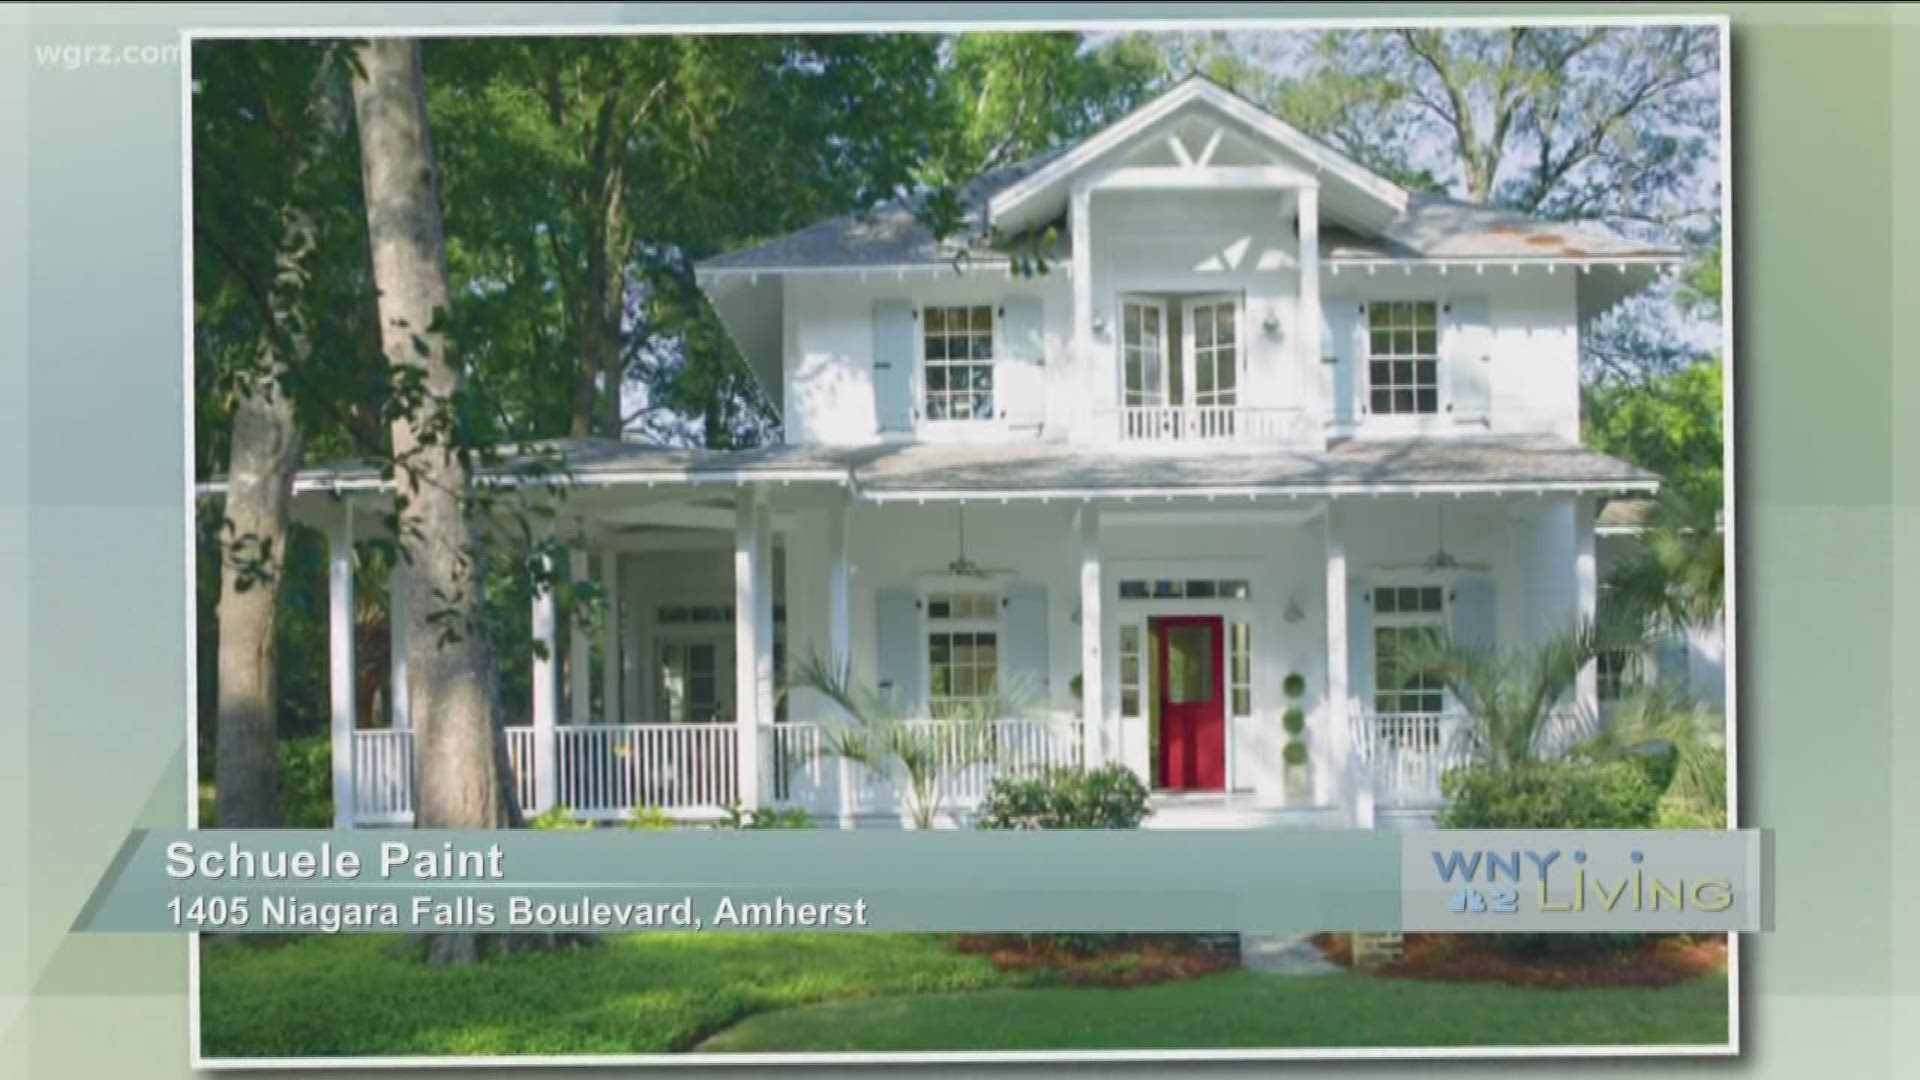 WNY Living - May 18 - Schuele Paint (SPONSORED CONTENT)